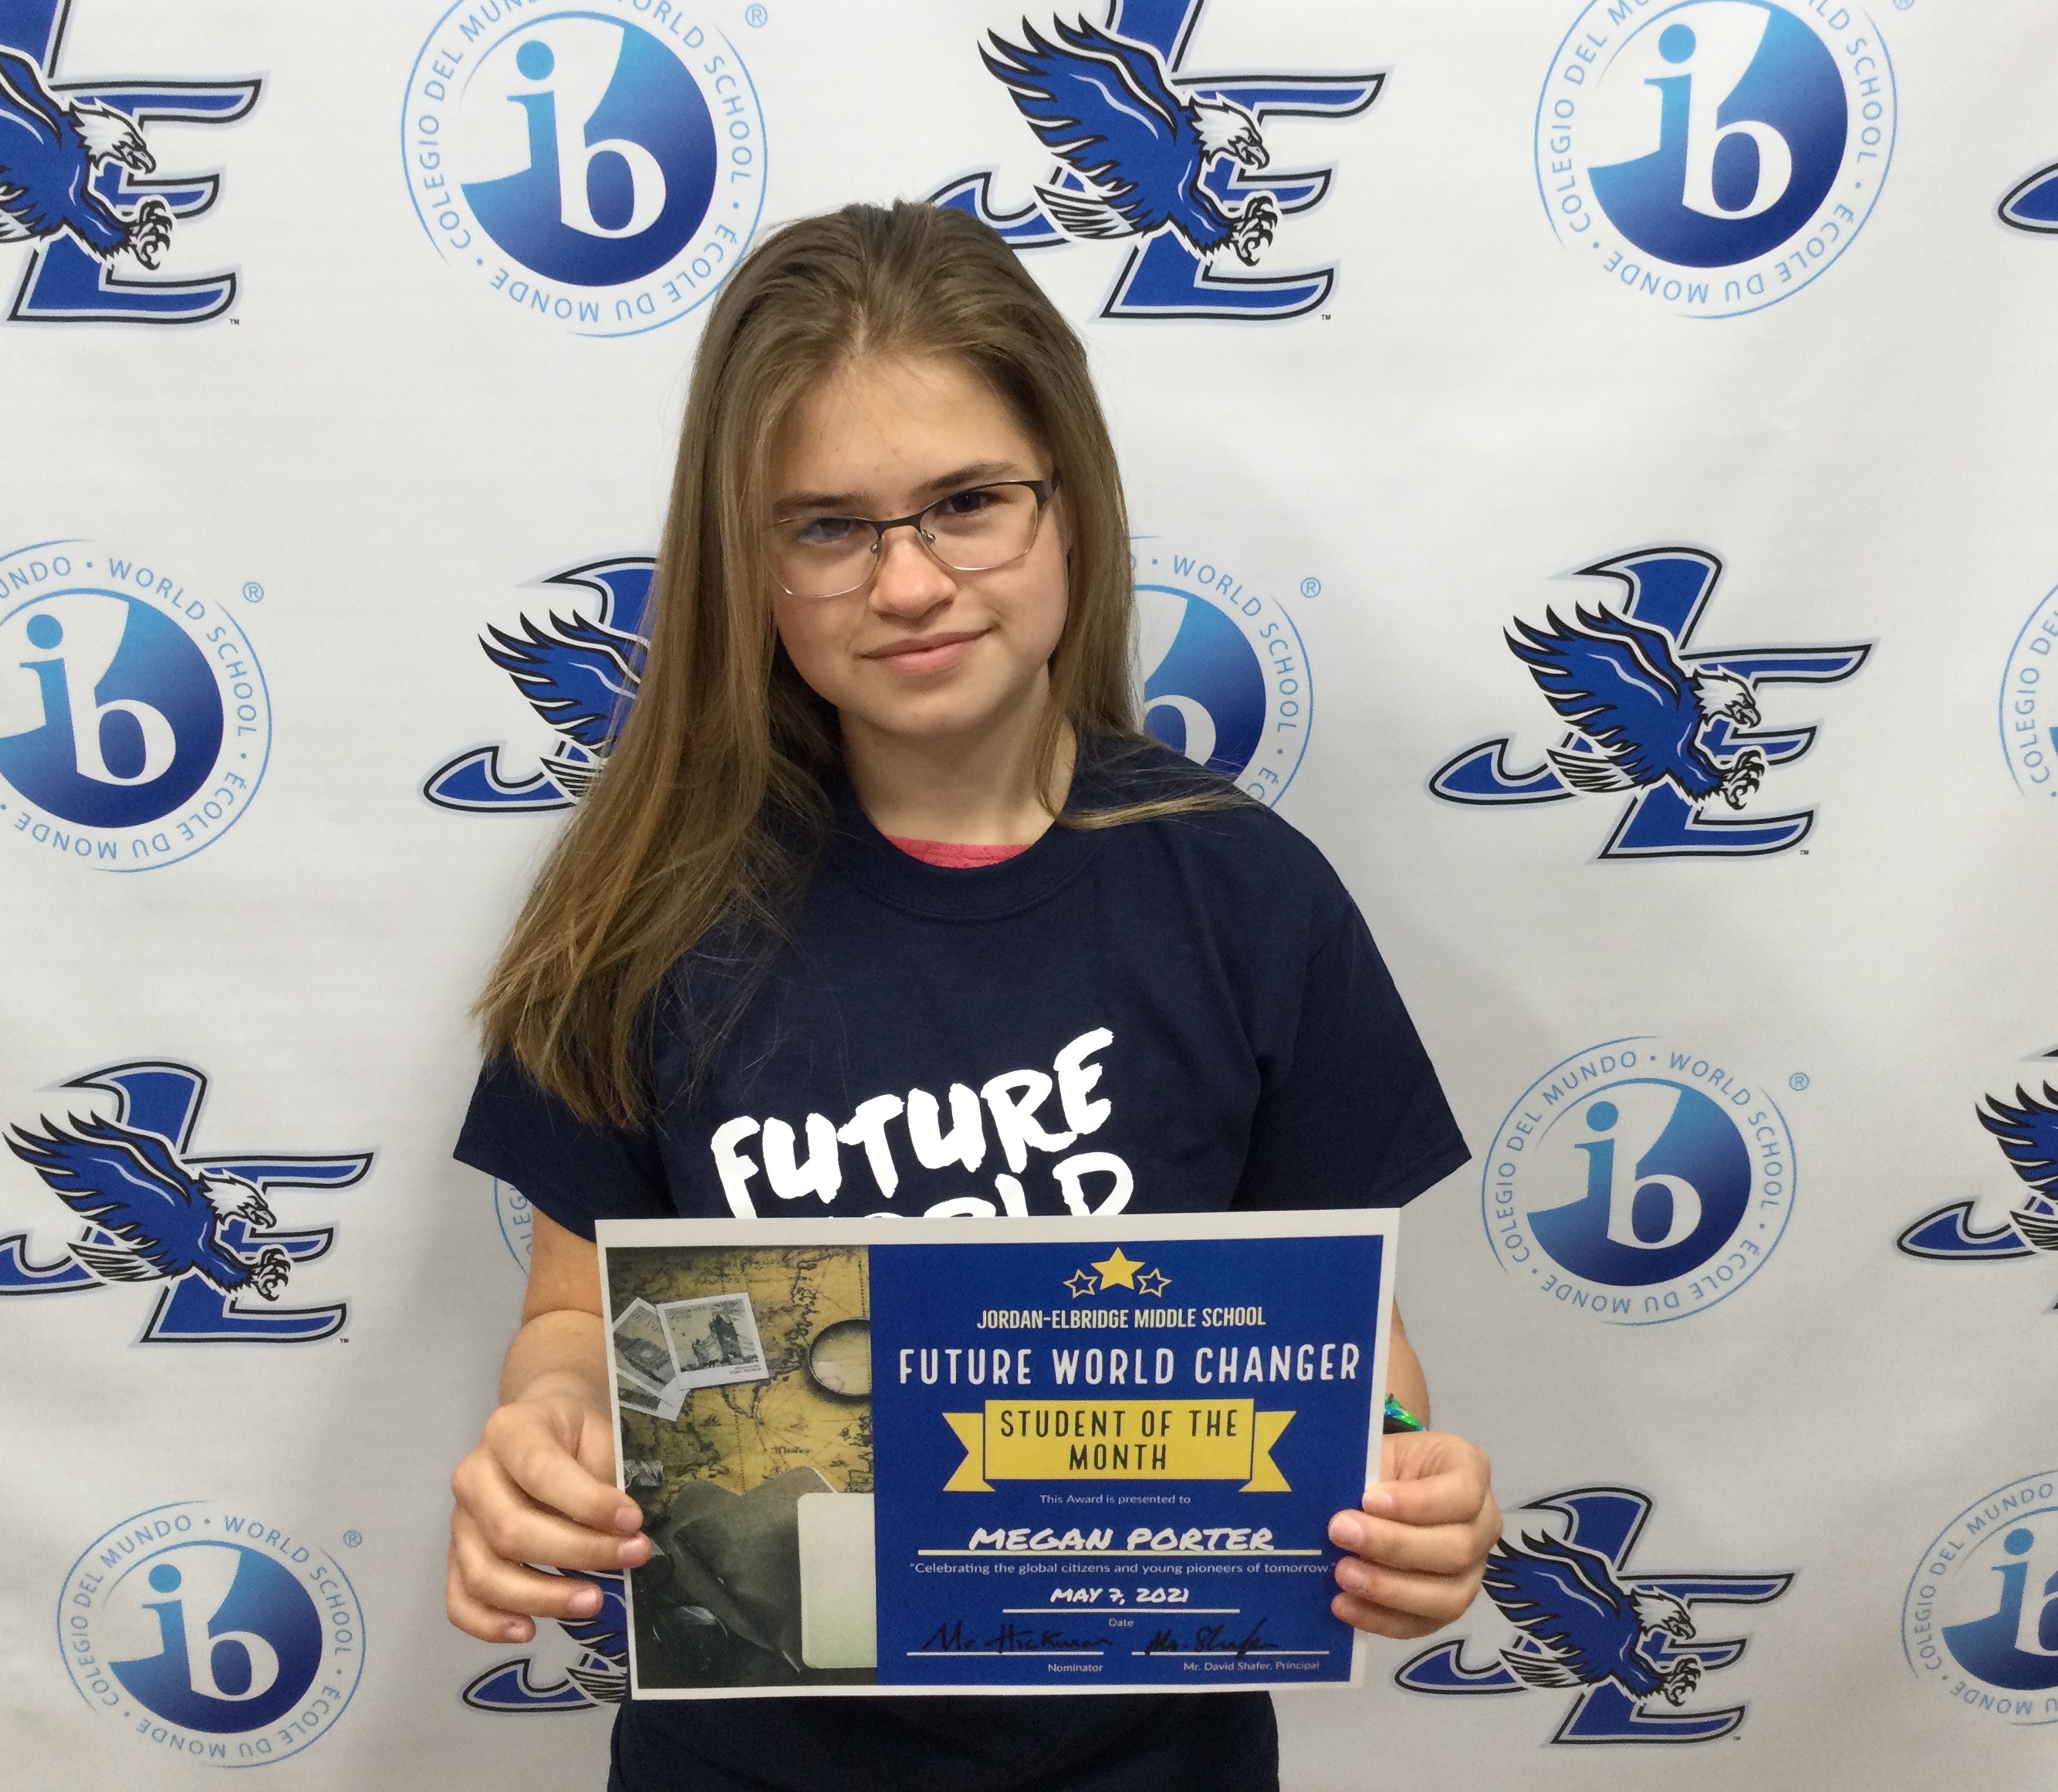 Megan Porter is recognized as an April 'Future World Changer'